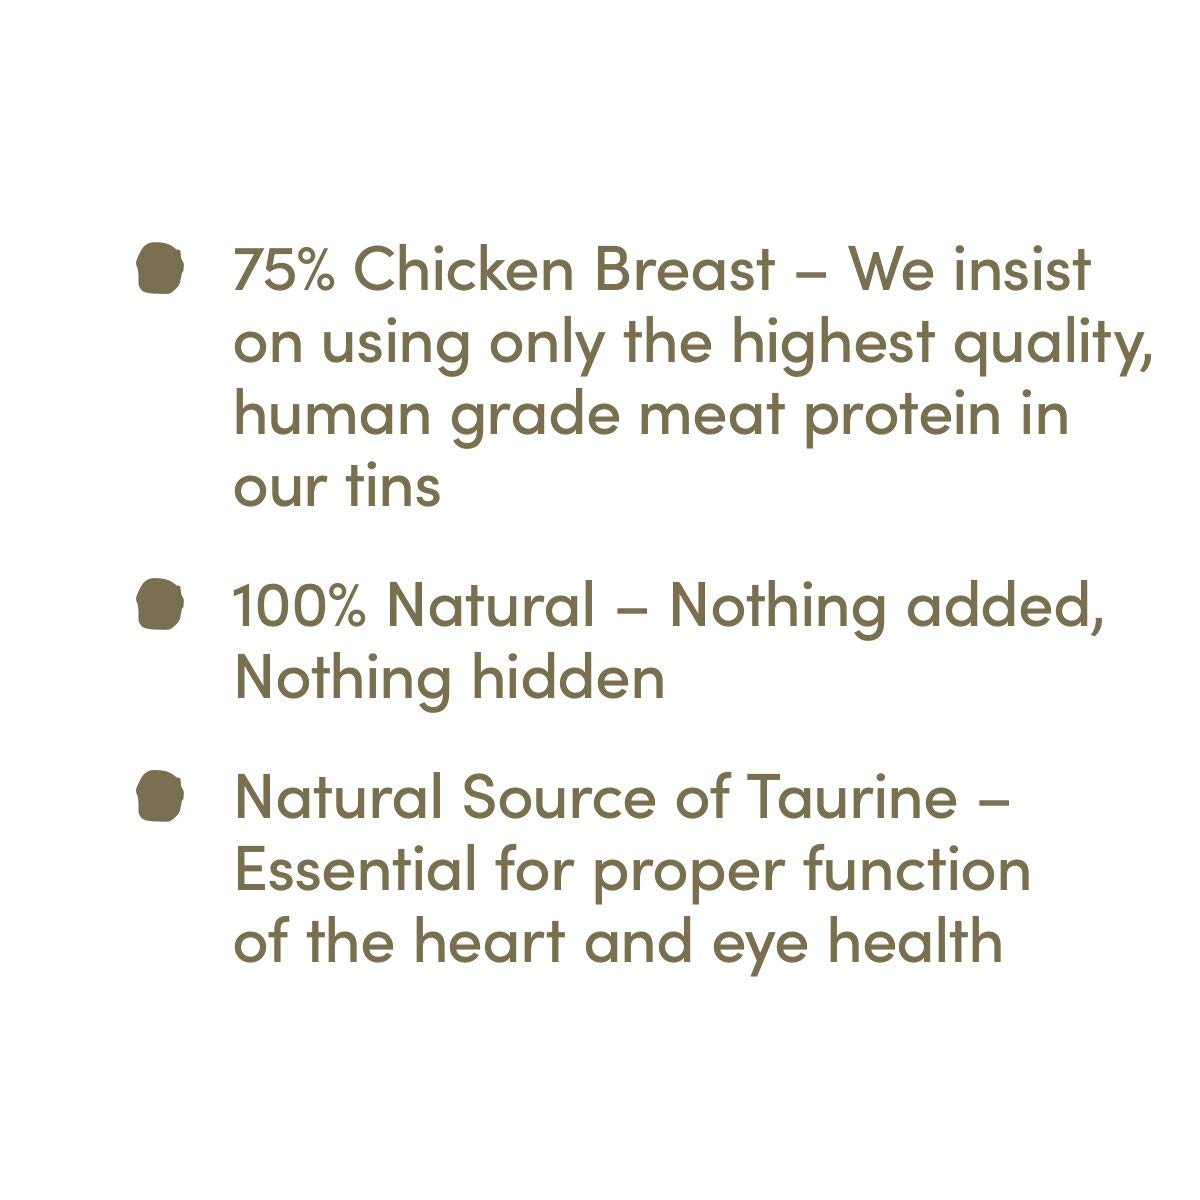 Applaws Natural 75% Chicken Breast Wet Cat Food - 70 g